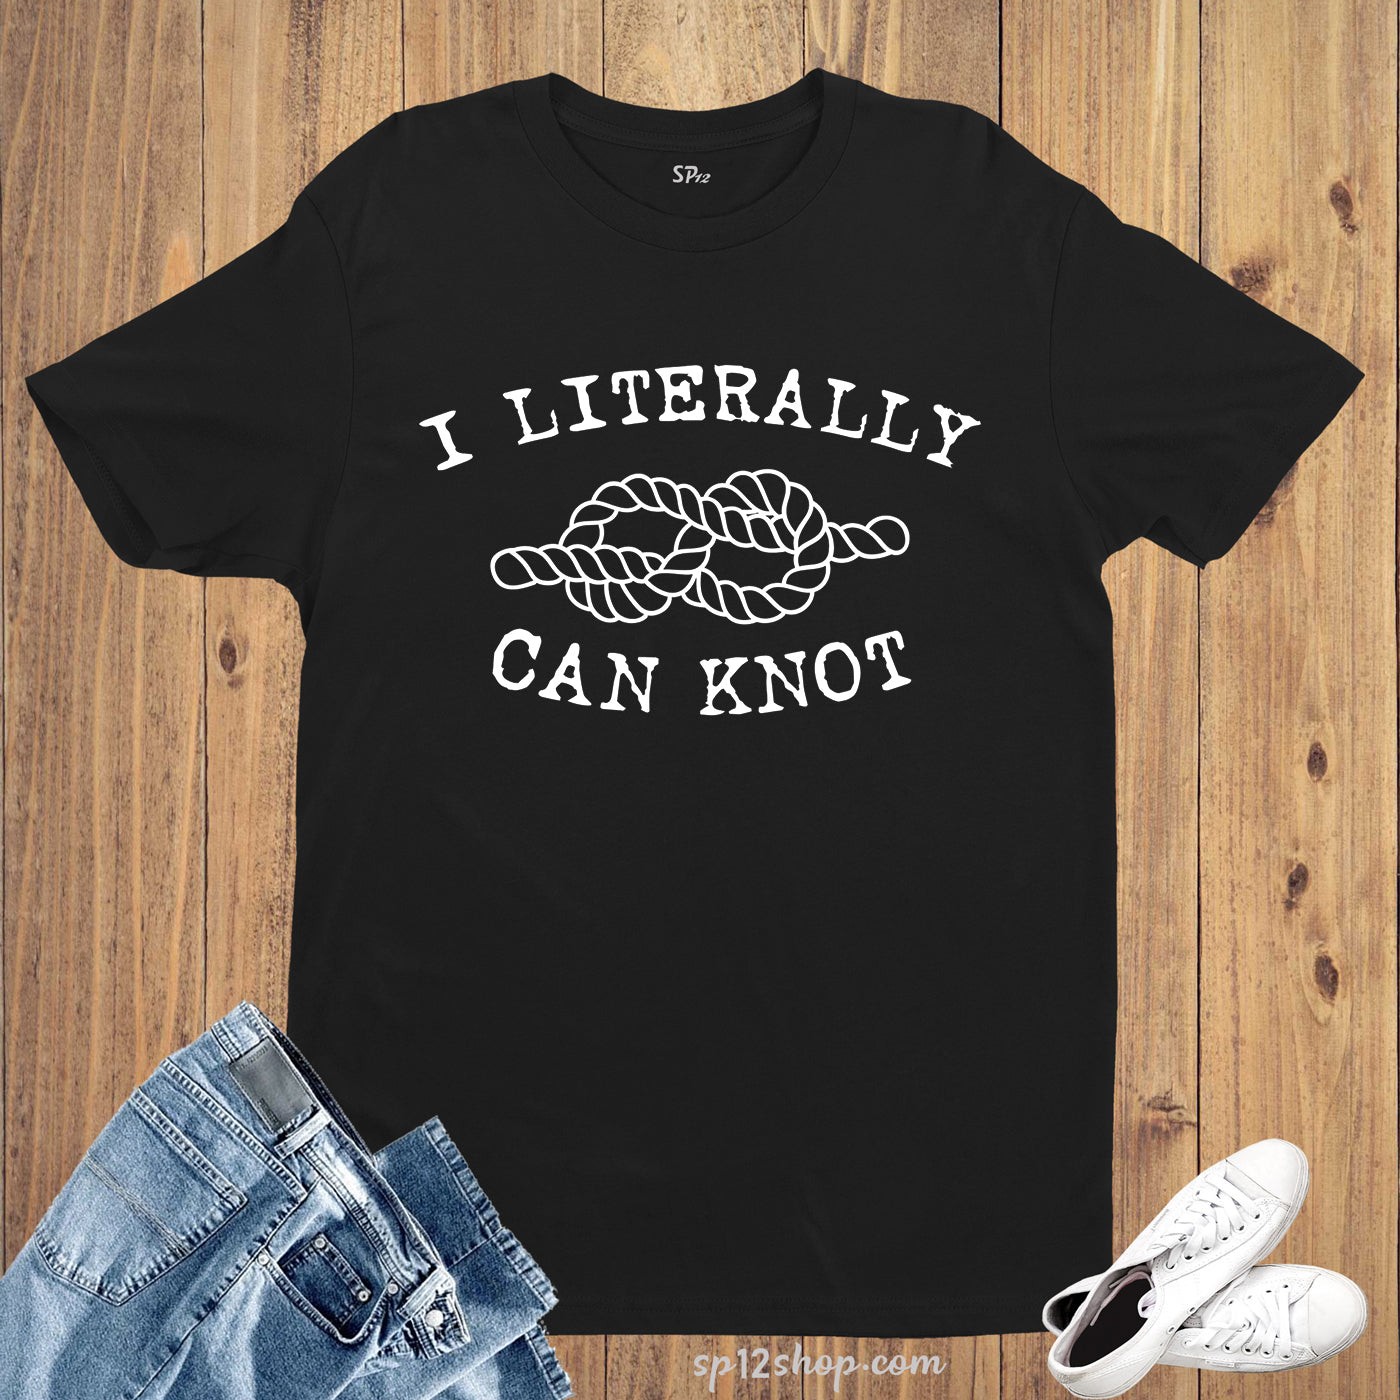 Literally Can Knot Spoof Comedy Funny Humorous Slogan T shirt